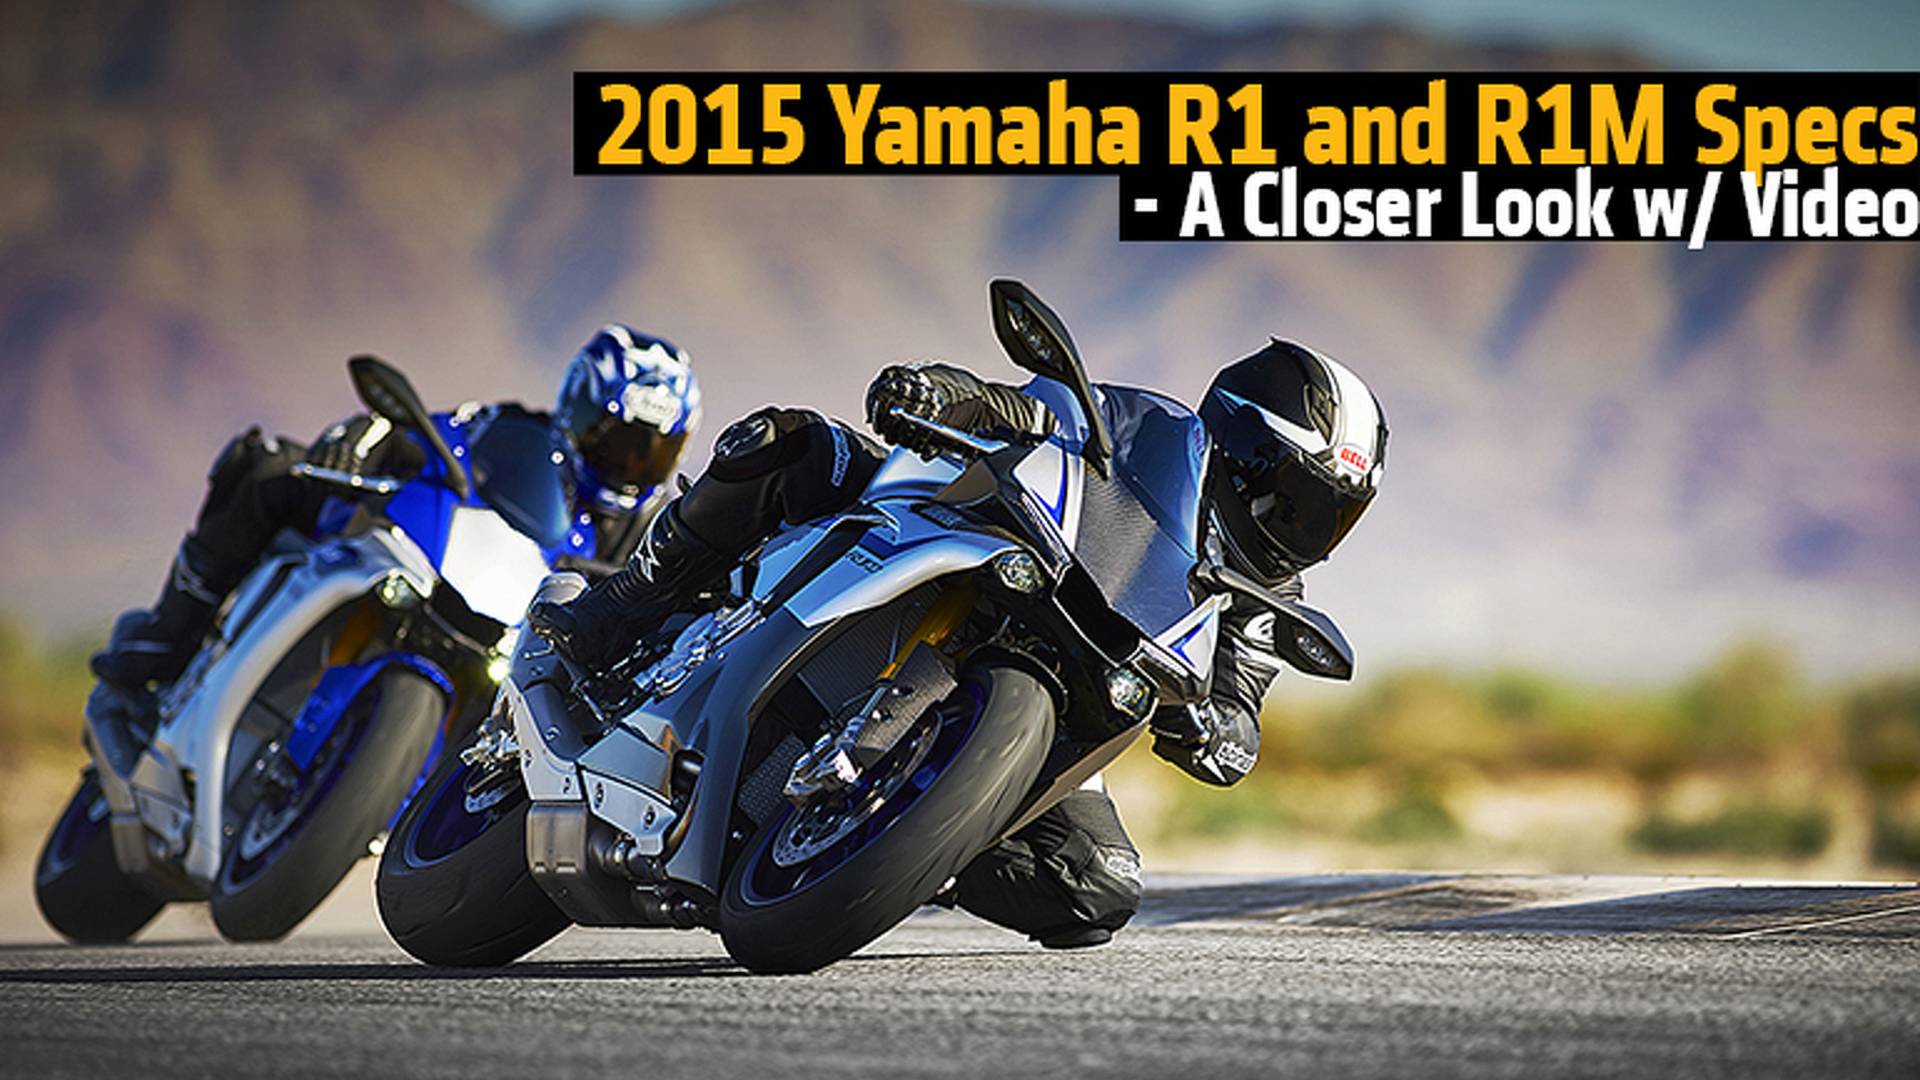 2015 Yamaha R1 and R1M Specs - A Closer Look w/ Video